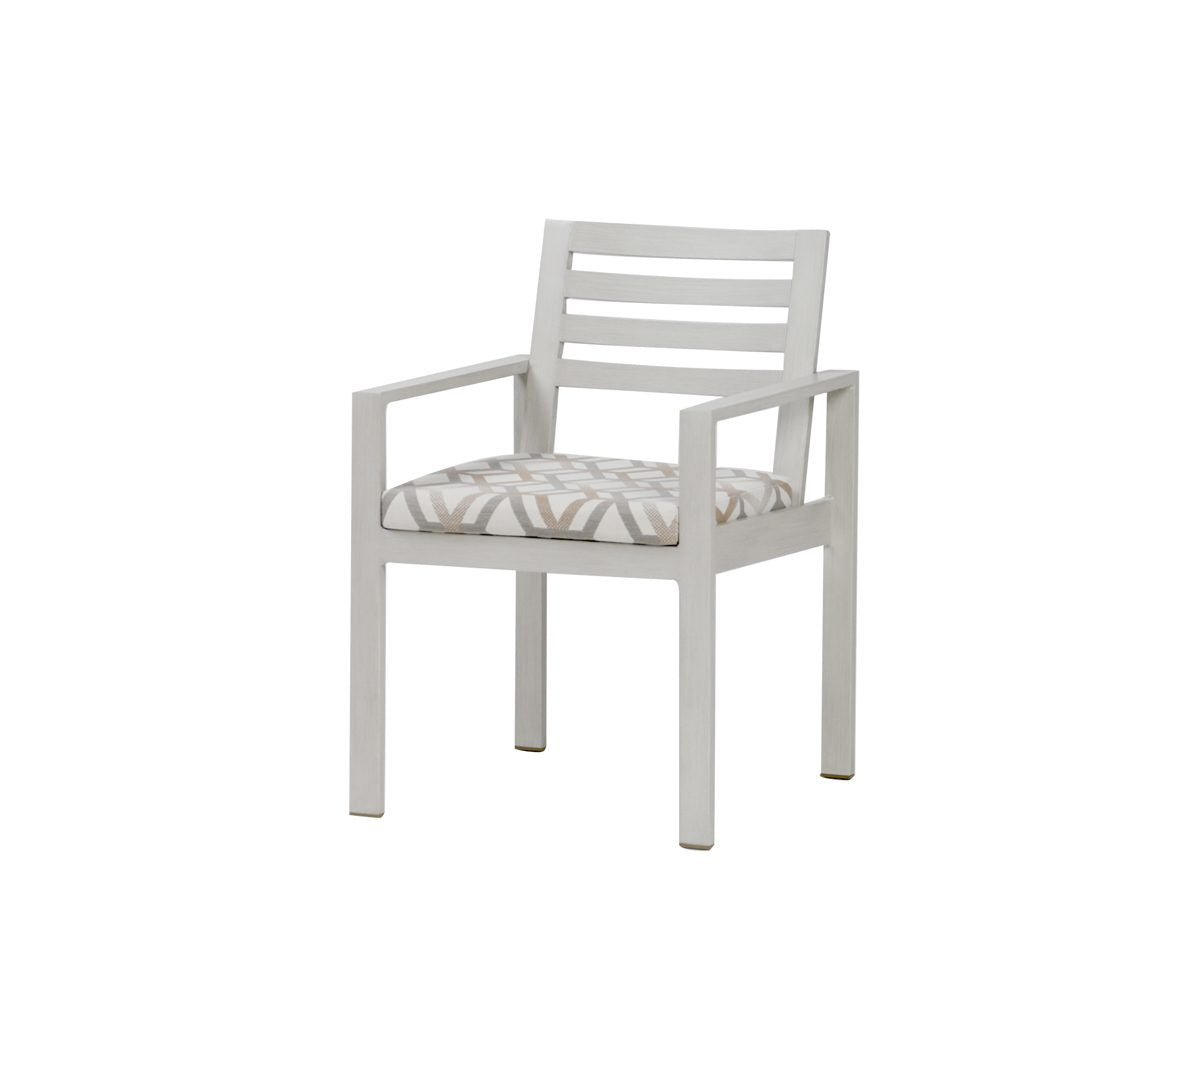 Ratana Element 5.0 Outdoor Dining Arm Chair